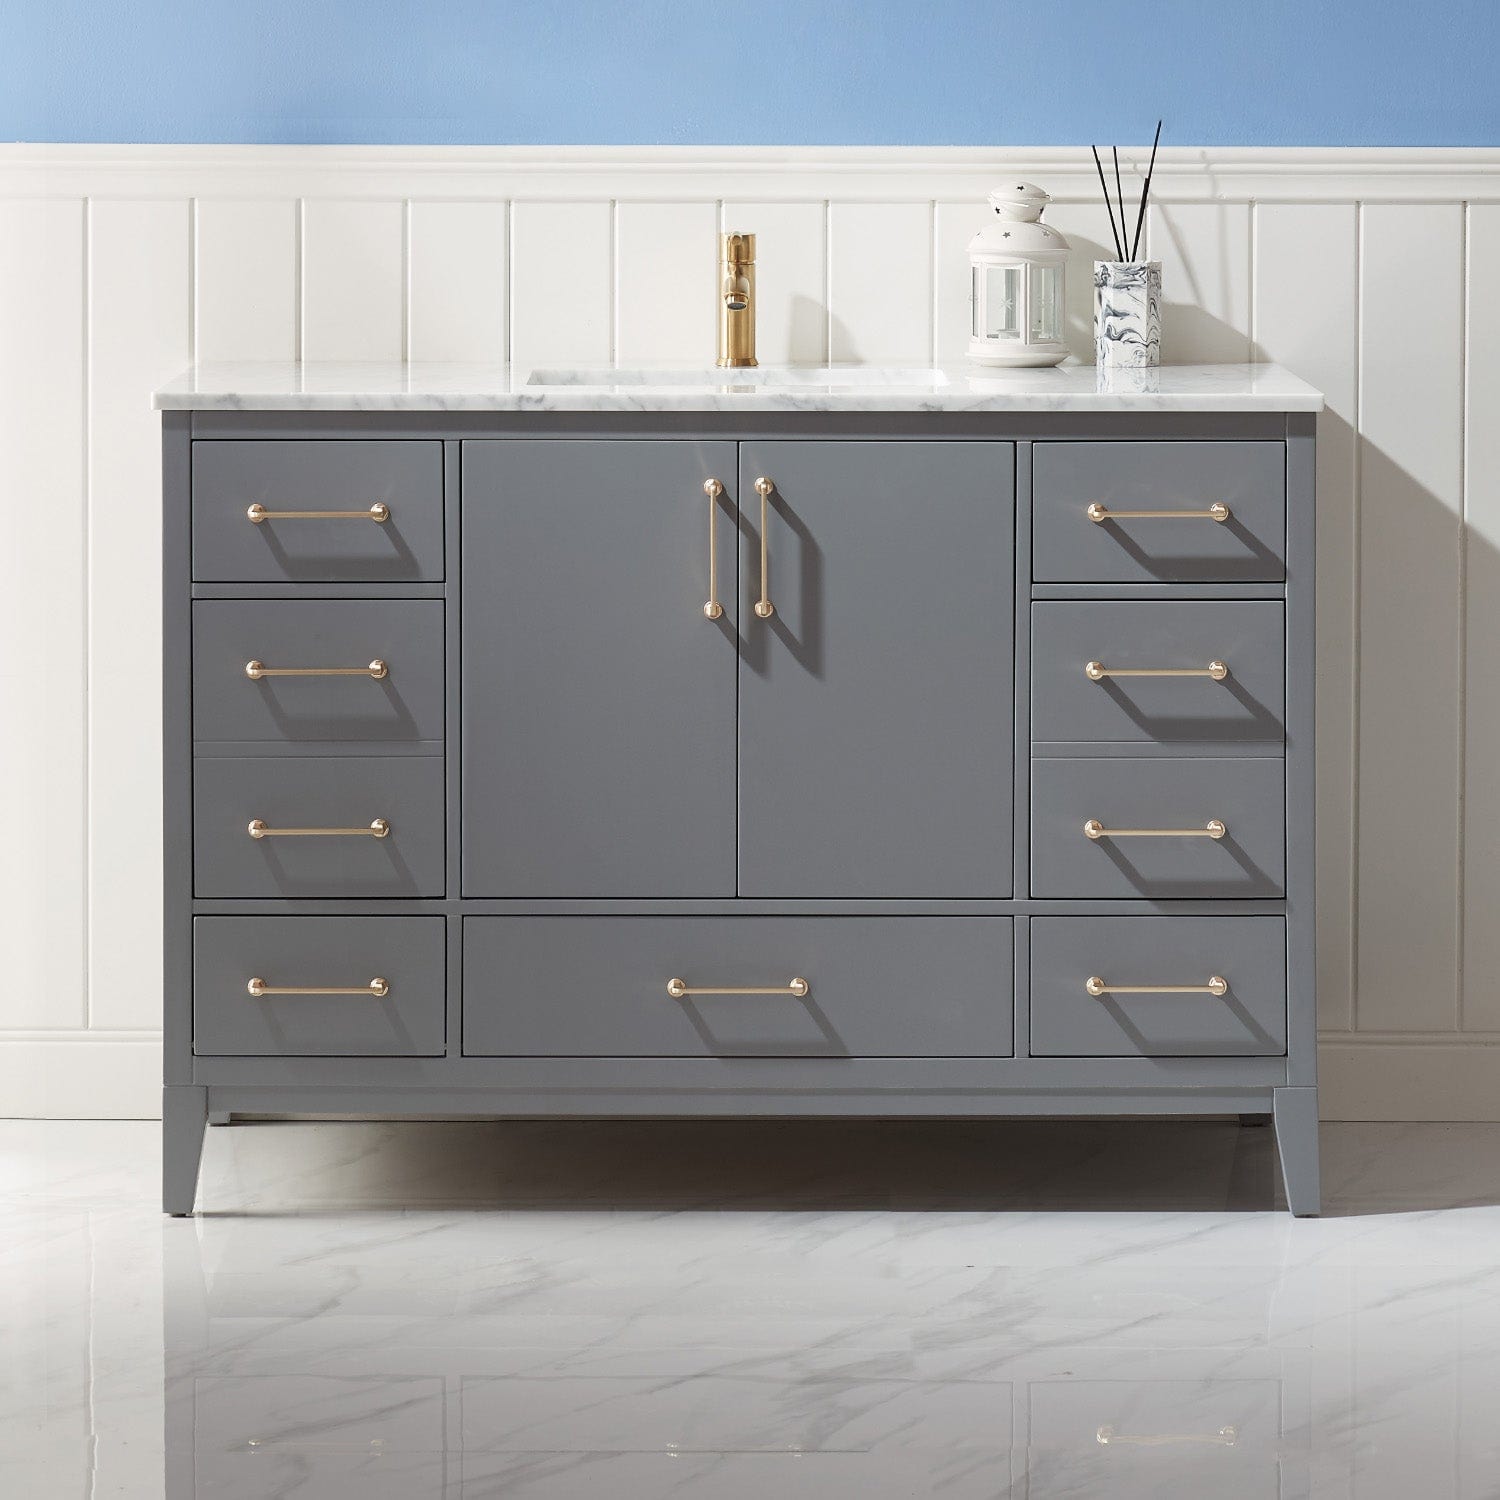 Altair Sutton 48" Single Bathroom Vanity Set in Gray and Carrara White Marble Countertop without Mirror 541048-GR-CA-NM - Molaix631112971881Vanity541048-GR-CA-NM